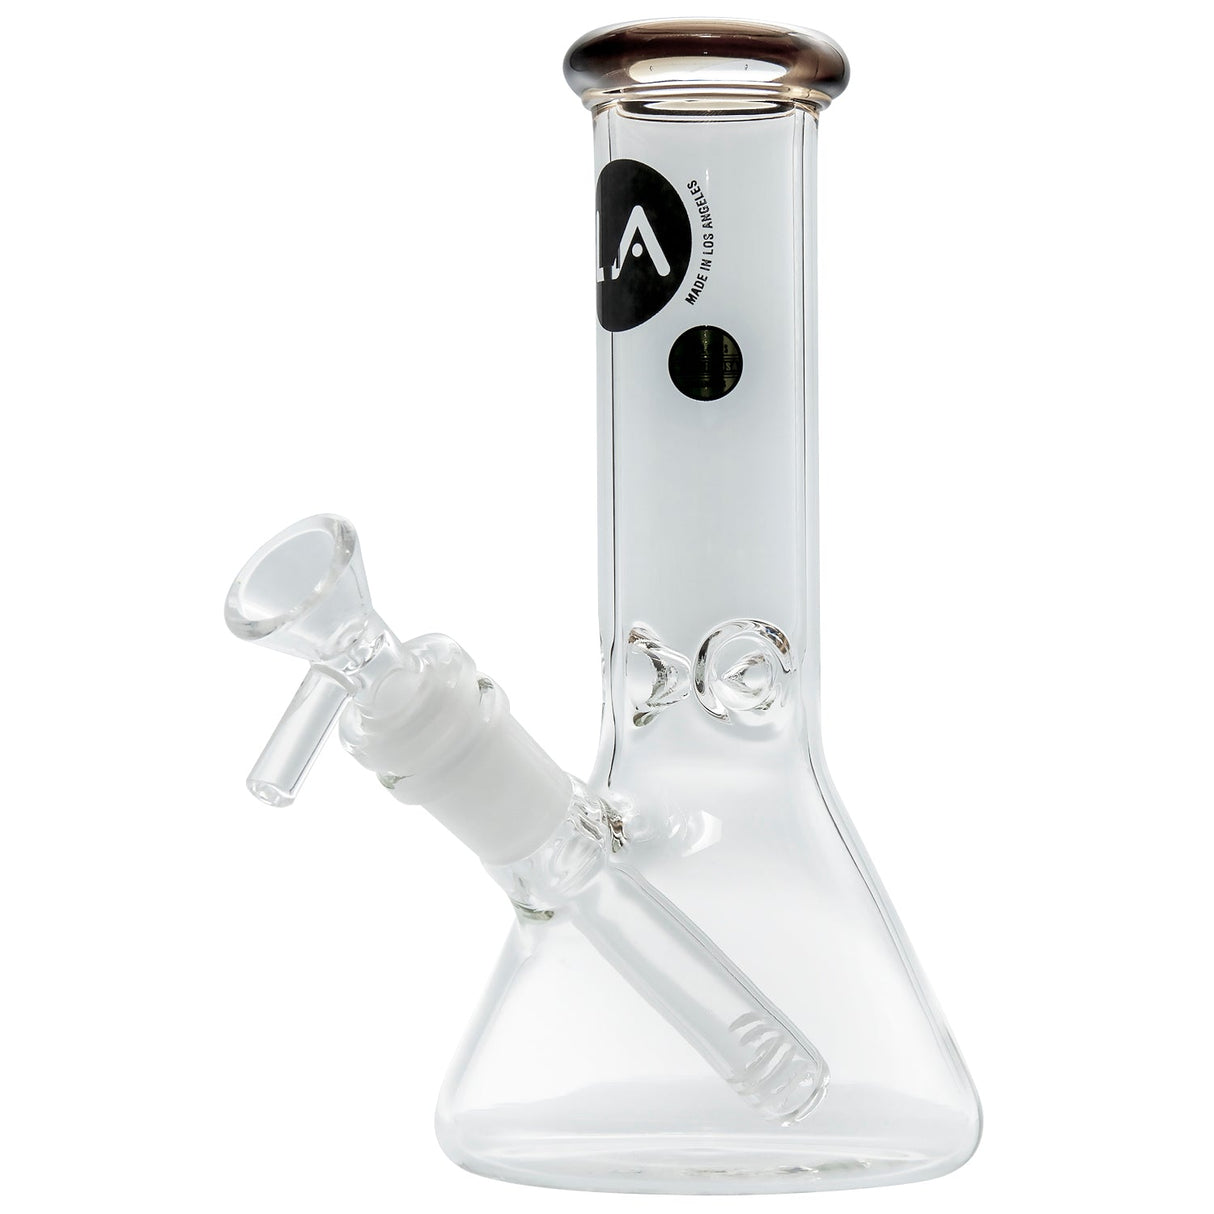 LA Pipes 8" Beaker Bong in Clear Borosilicate Glass with Amber Accents, Side View